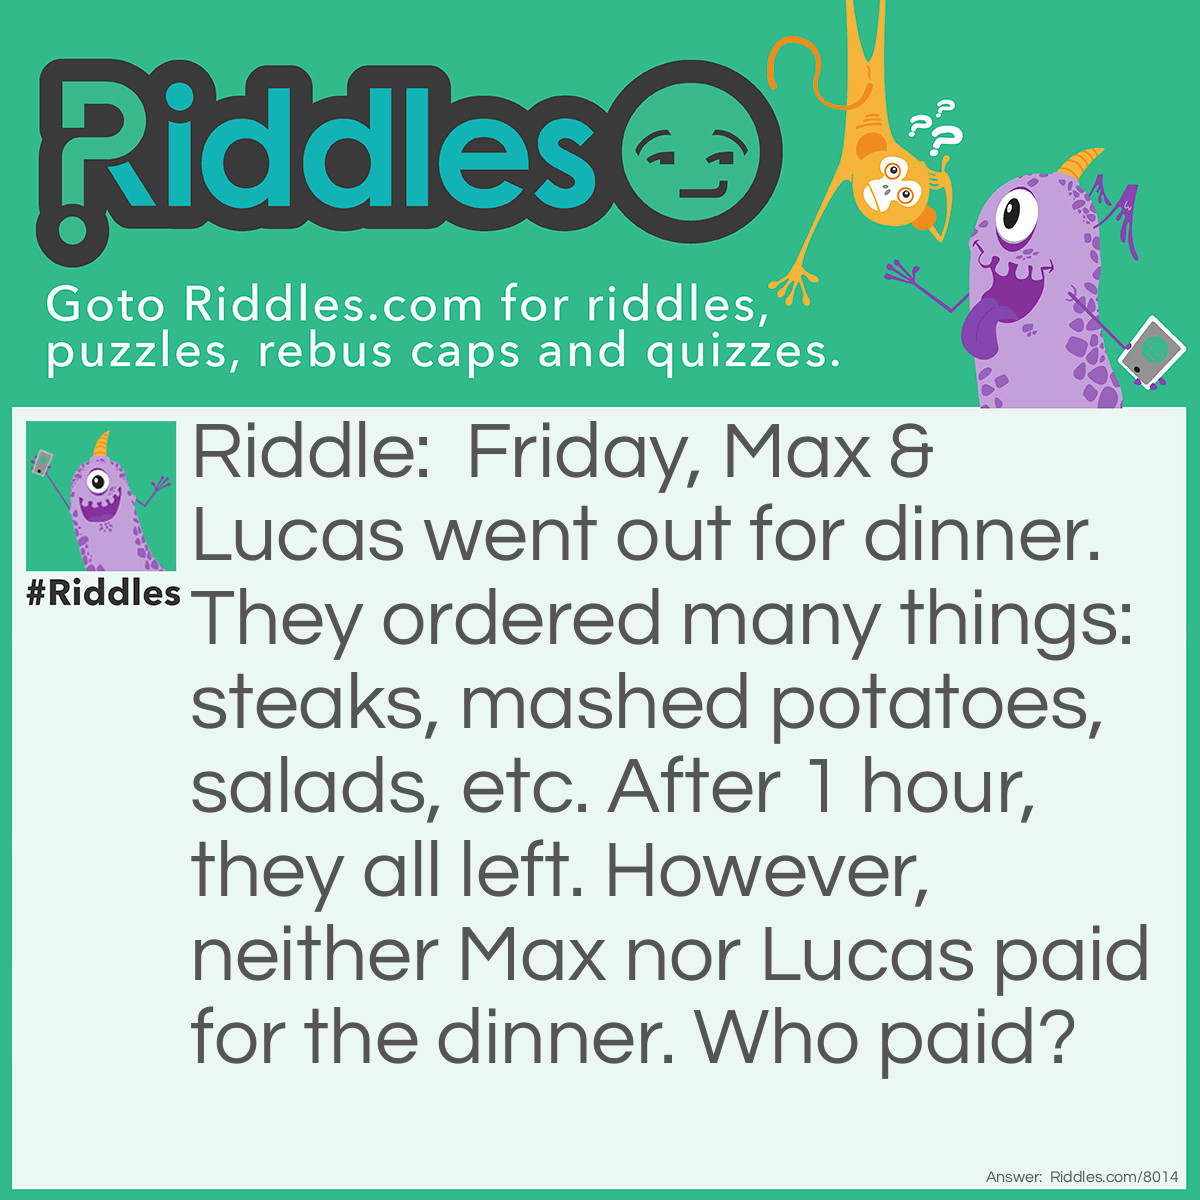 Riddle: Friday, Max & Lucas went out for dinner. They ordered many things: steaks, mashed potatoes, salads, etc. After 1 hour, they all left. However, neither Max nor Lucas paid for the dinner. Who paid? Answer: Friday.